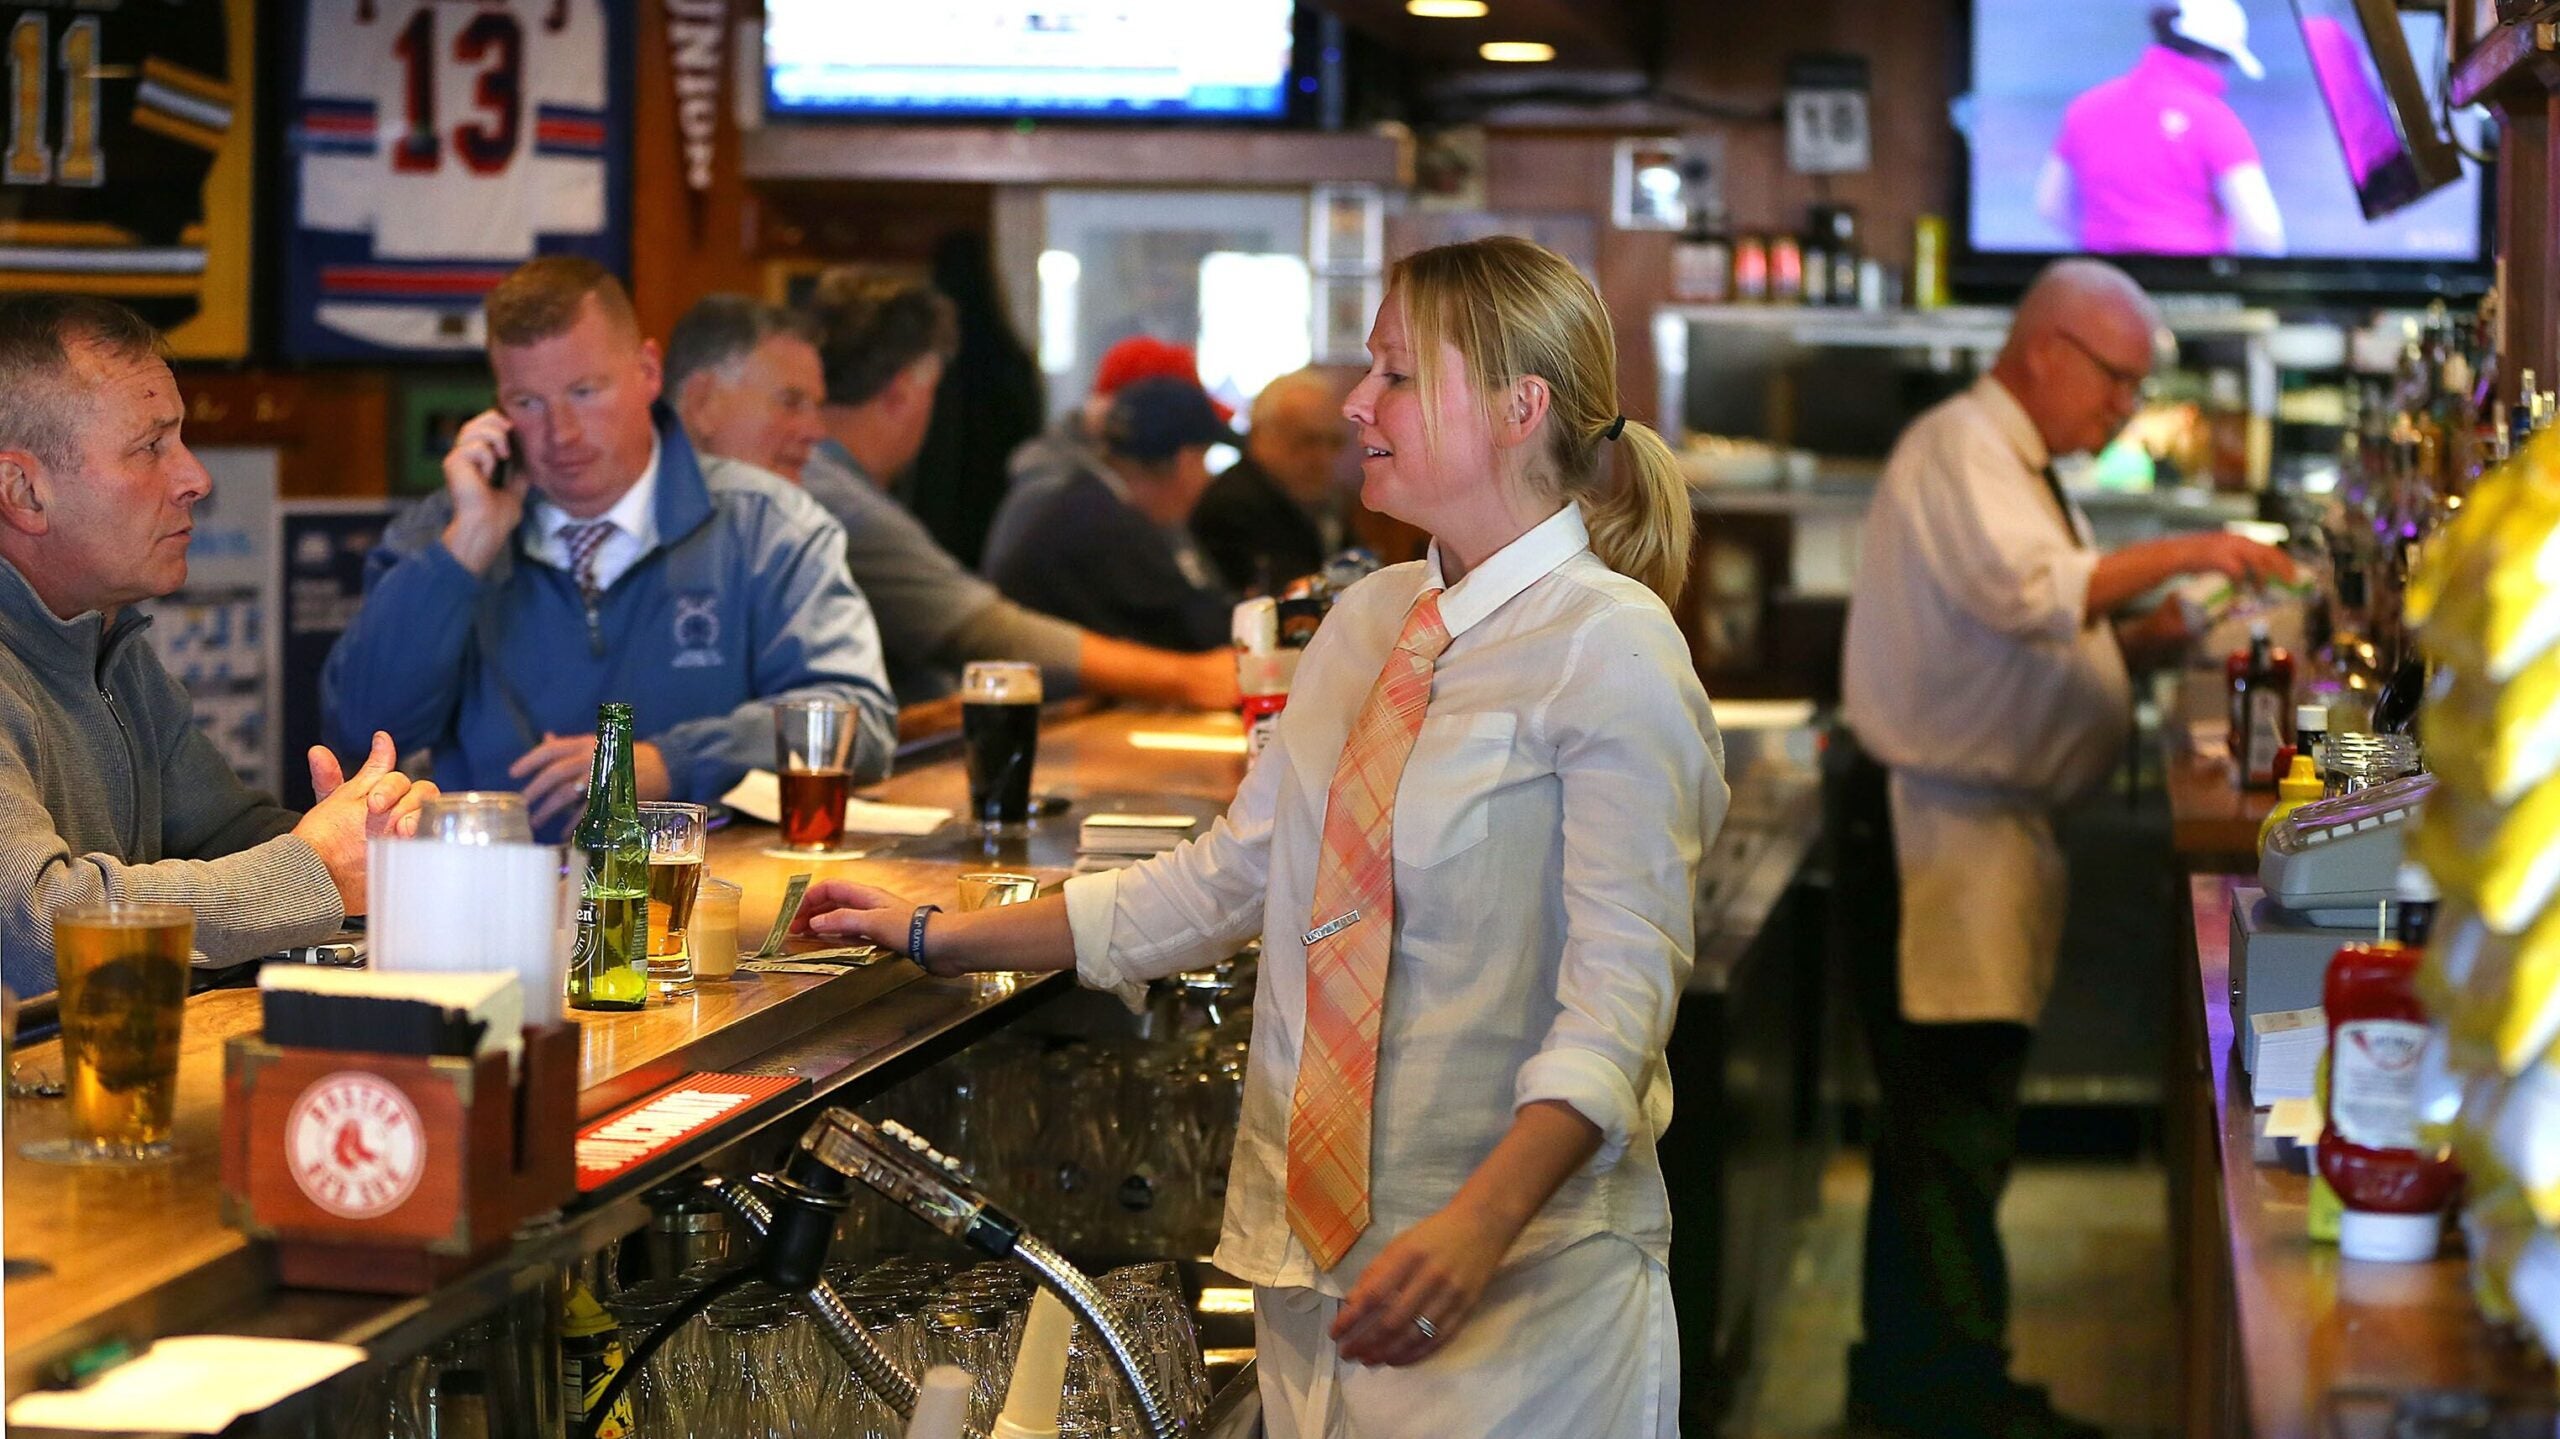 Nicole Eaton is the first female bartender at the quintessential working man's bar, The Eire Pub.